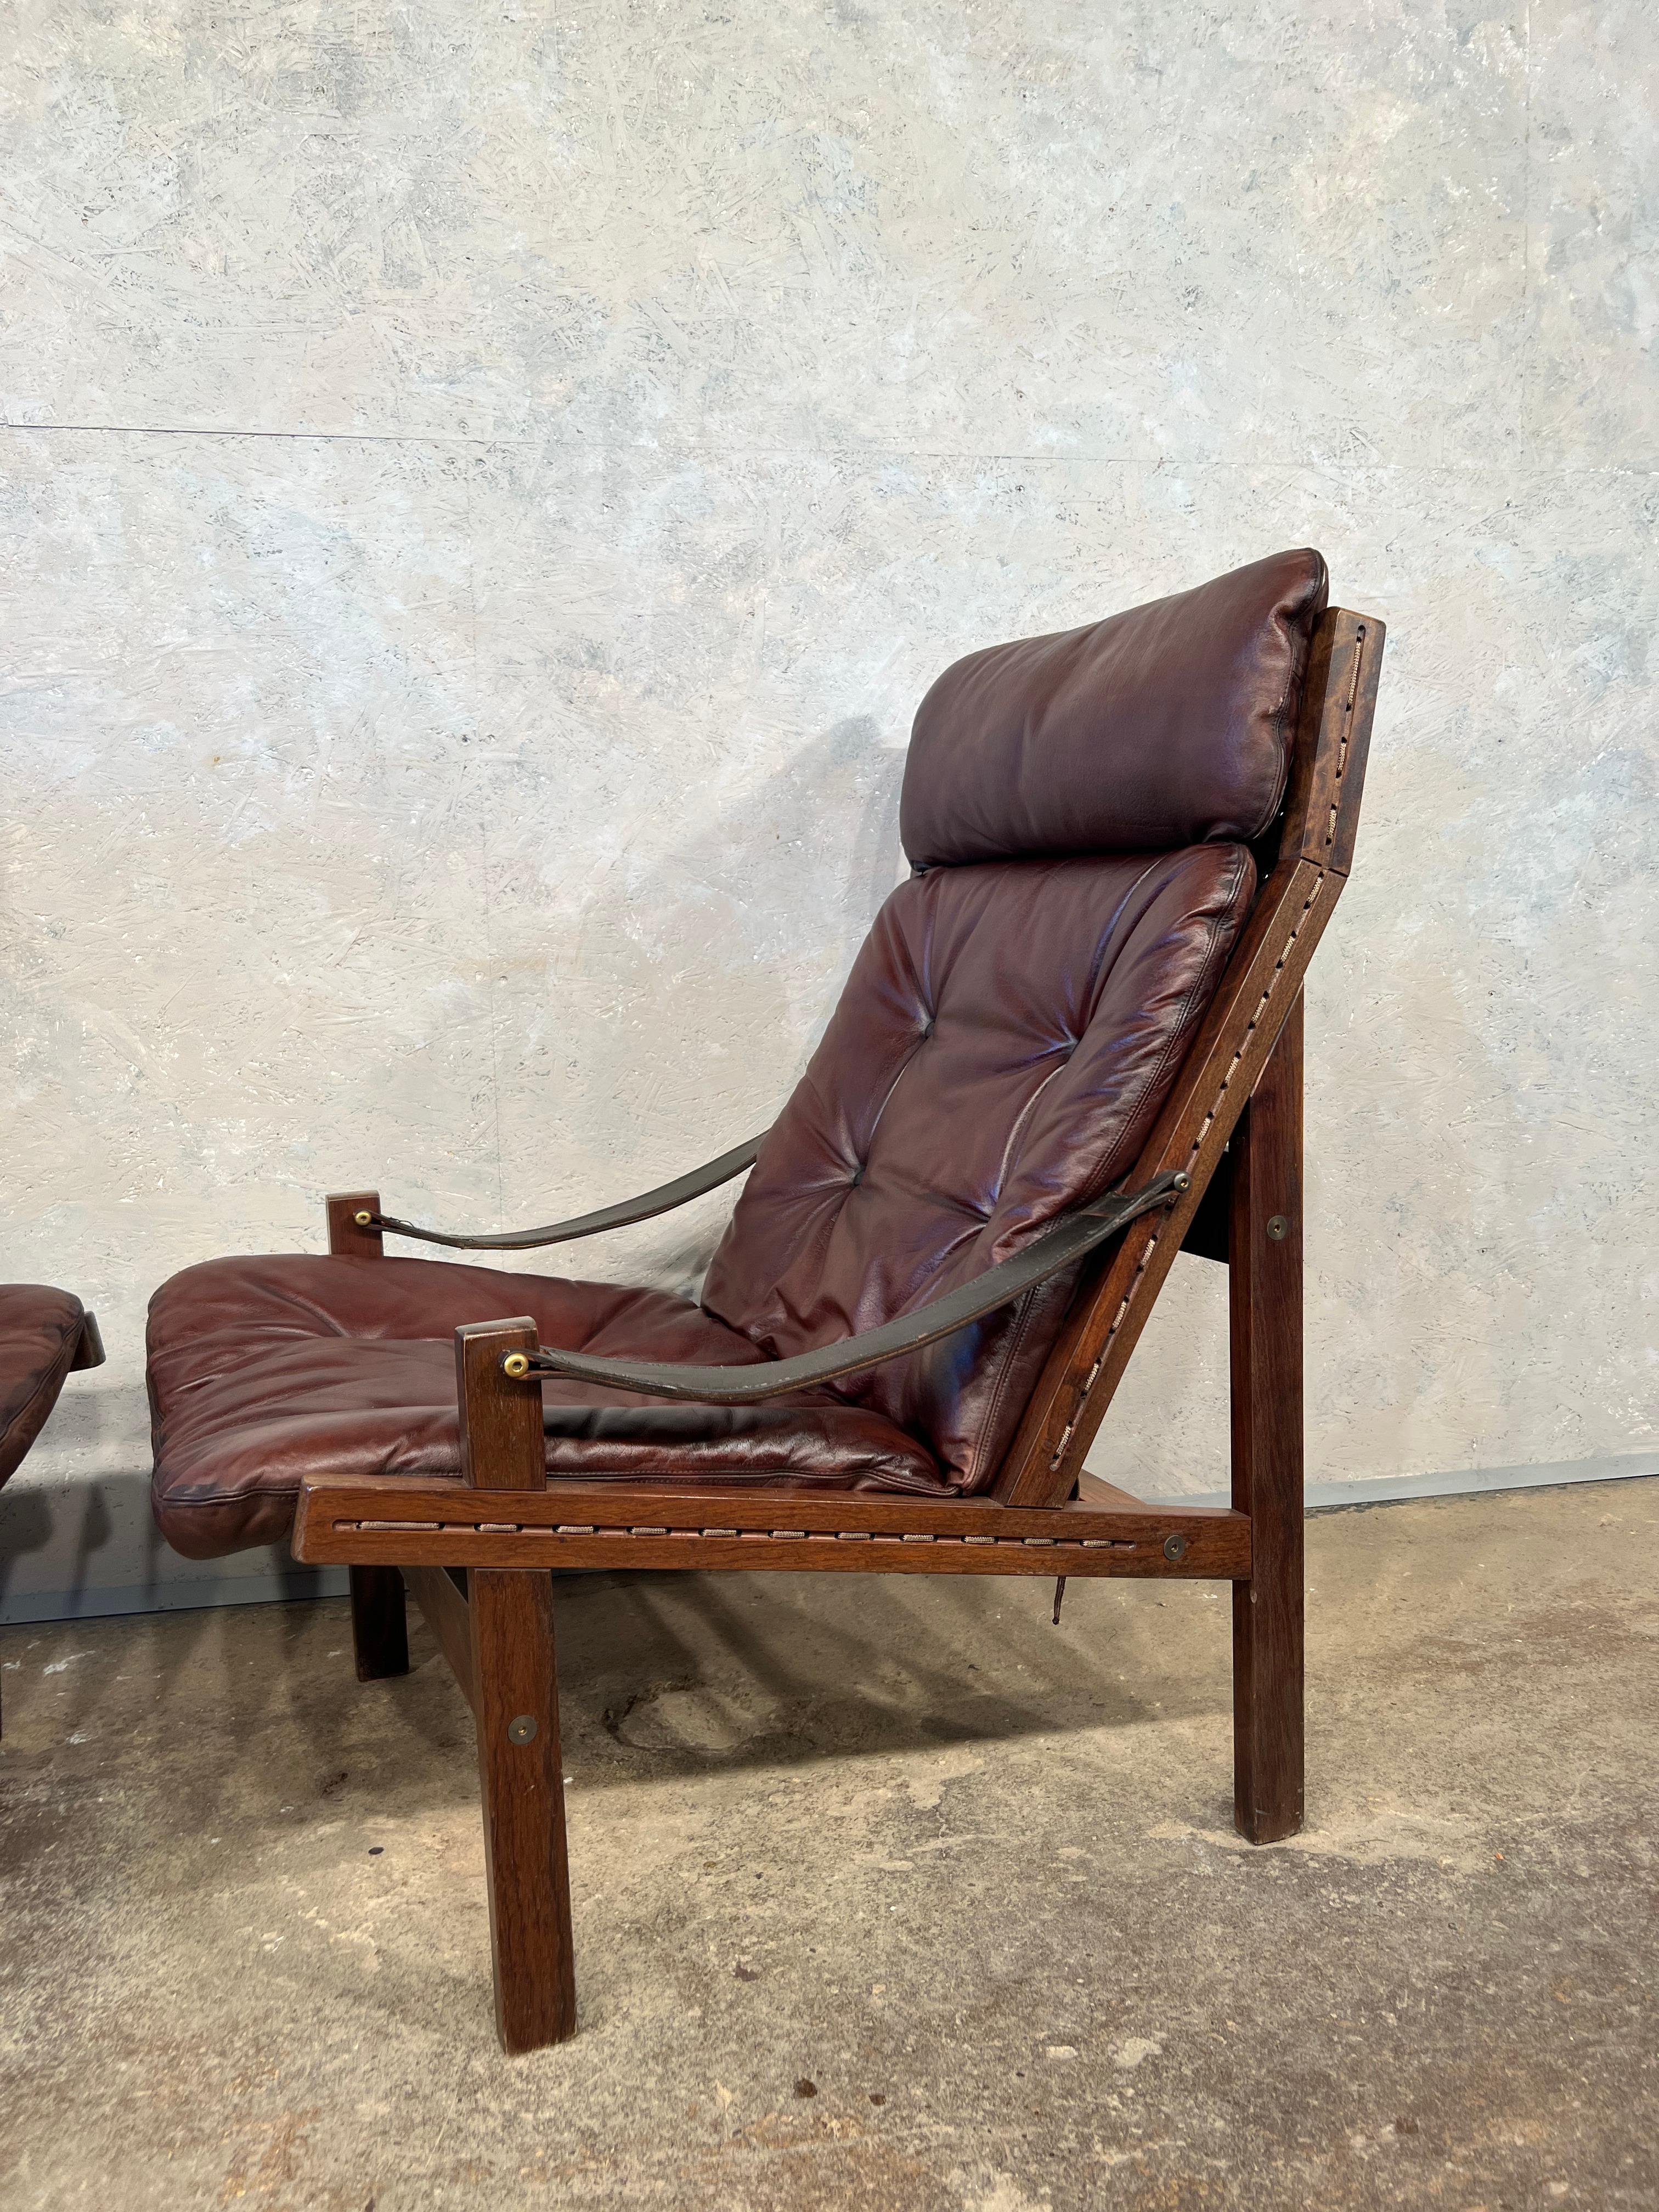 Pair of Hunter High-Back Lounge Chairs by Torbjørn Afdal for Bruksbo #526 In Good Condition For Sale In Lewes, GB